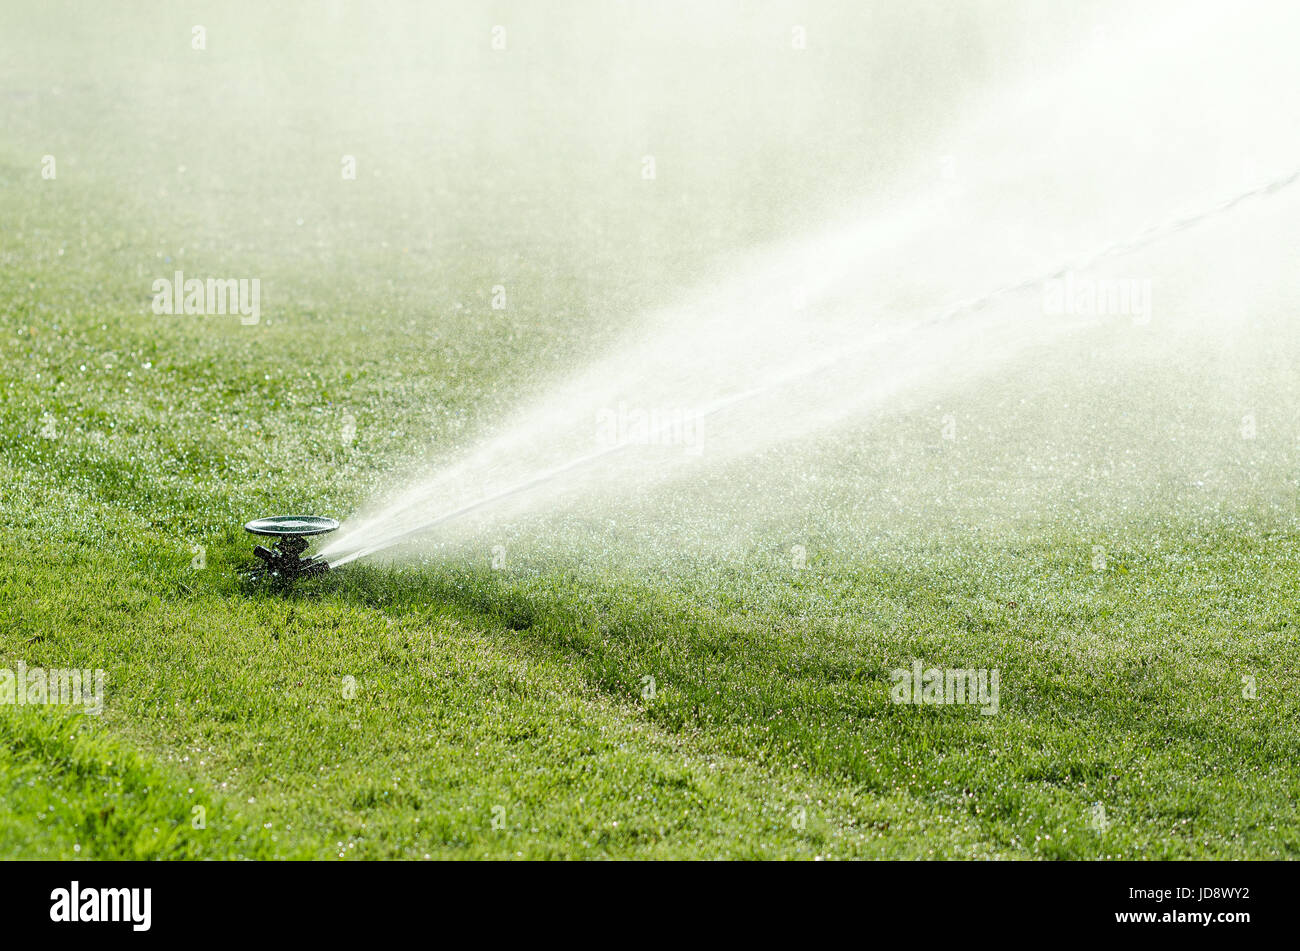 Impact sprinkler on lawn in action. Impulse sprinkler head with out streaming water fountain on artificial green lawn in full sunlight. Stock Photo